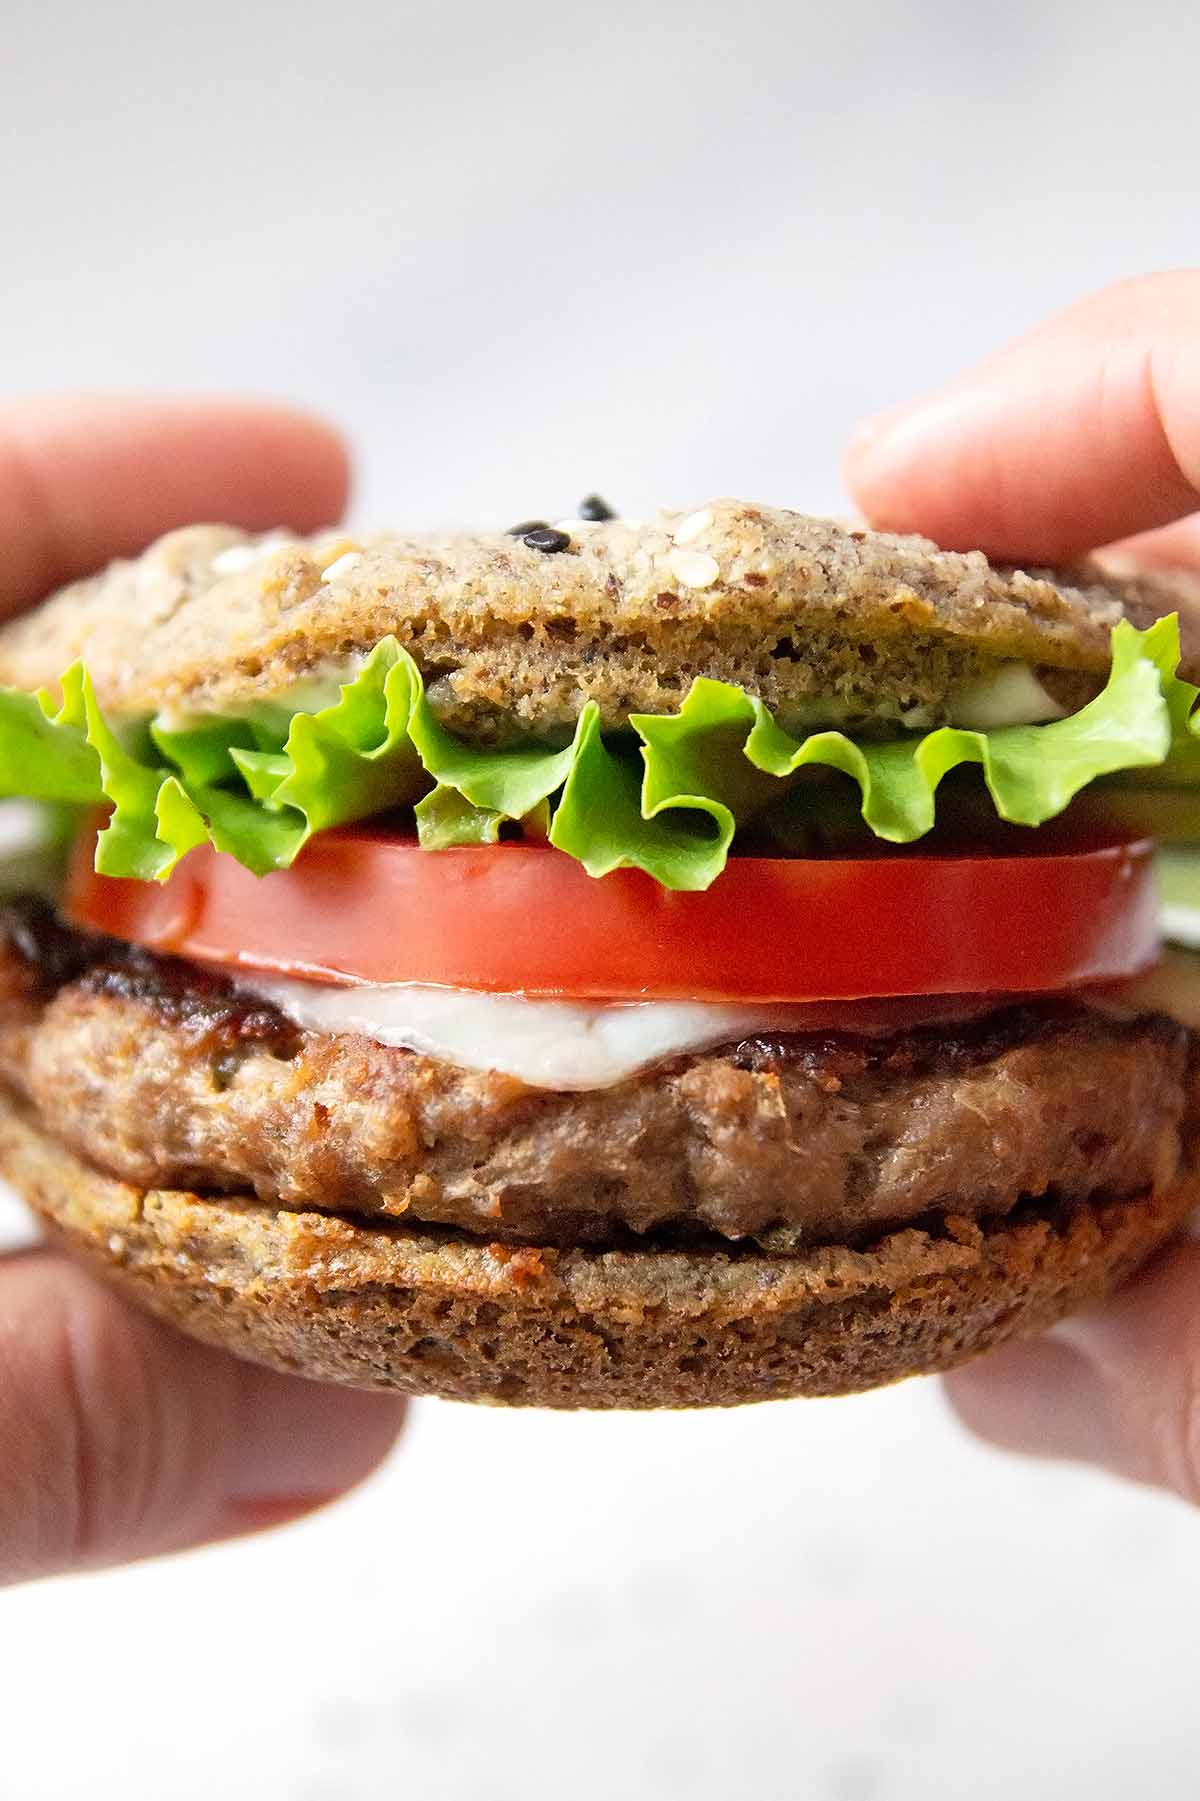 Keto Burger Buns made with coconut flour layered with hamburger patty, cheese, tomato and lettuce